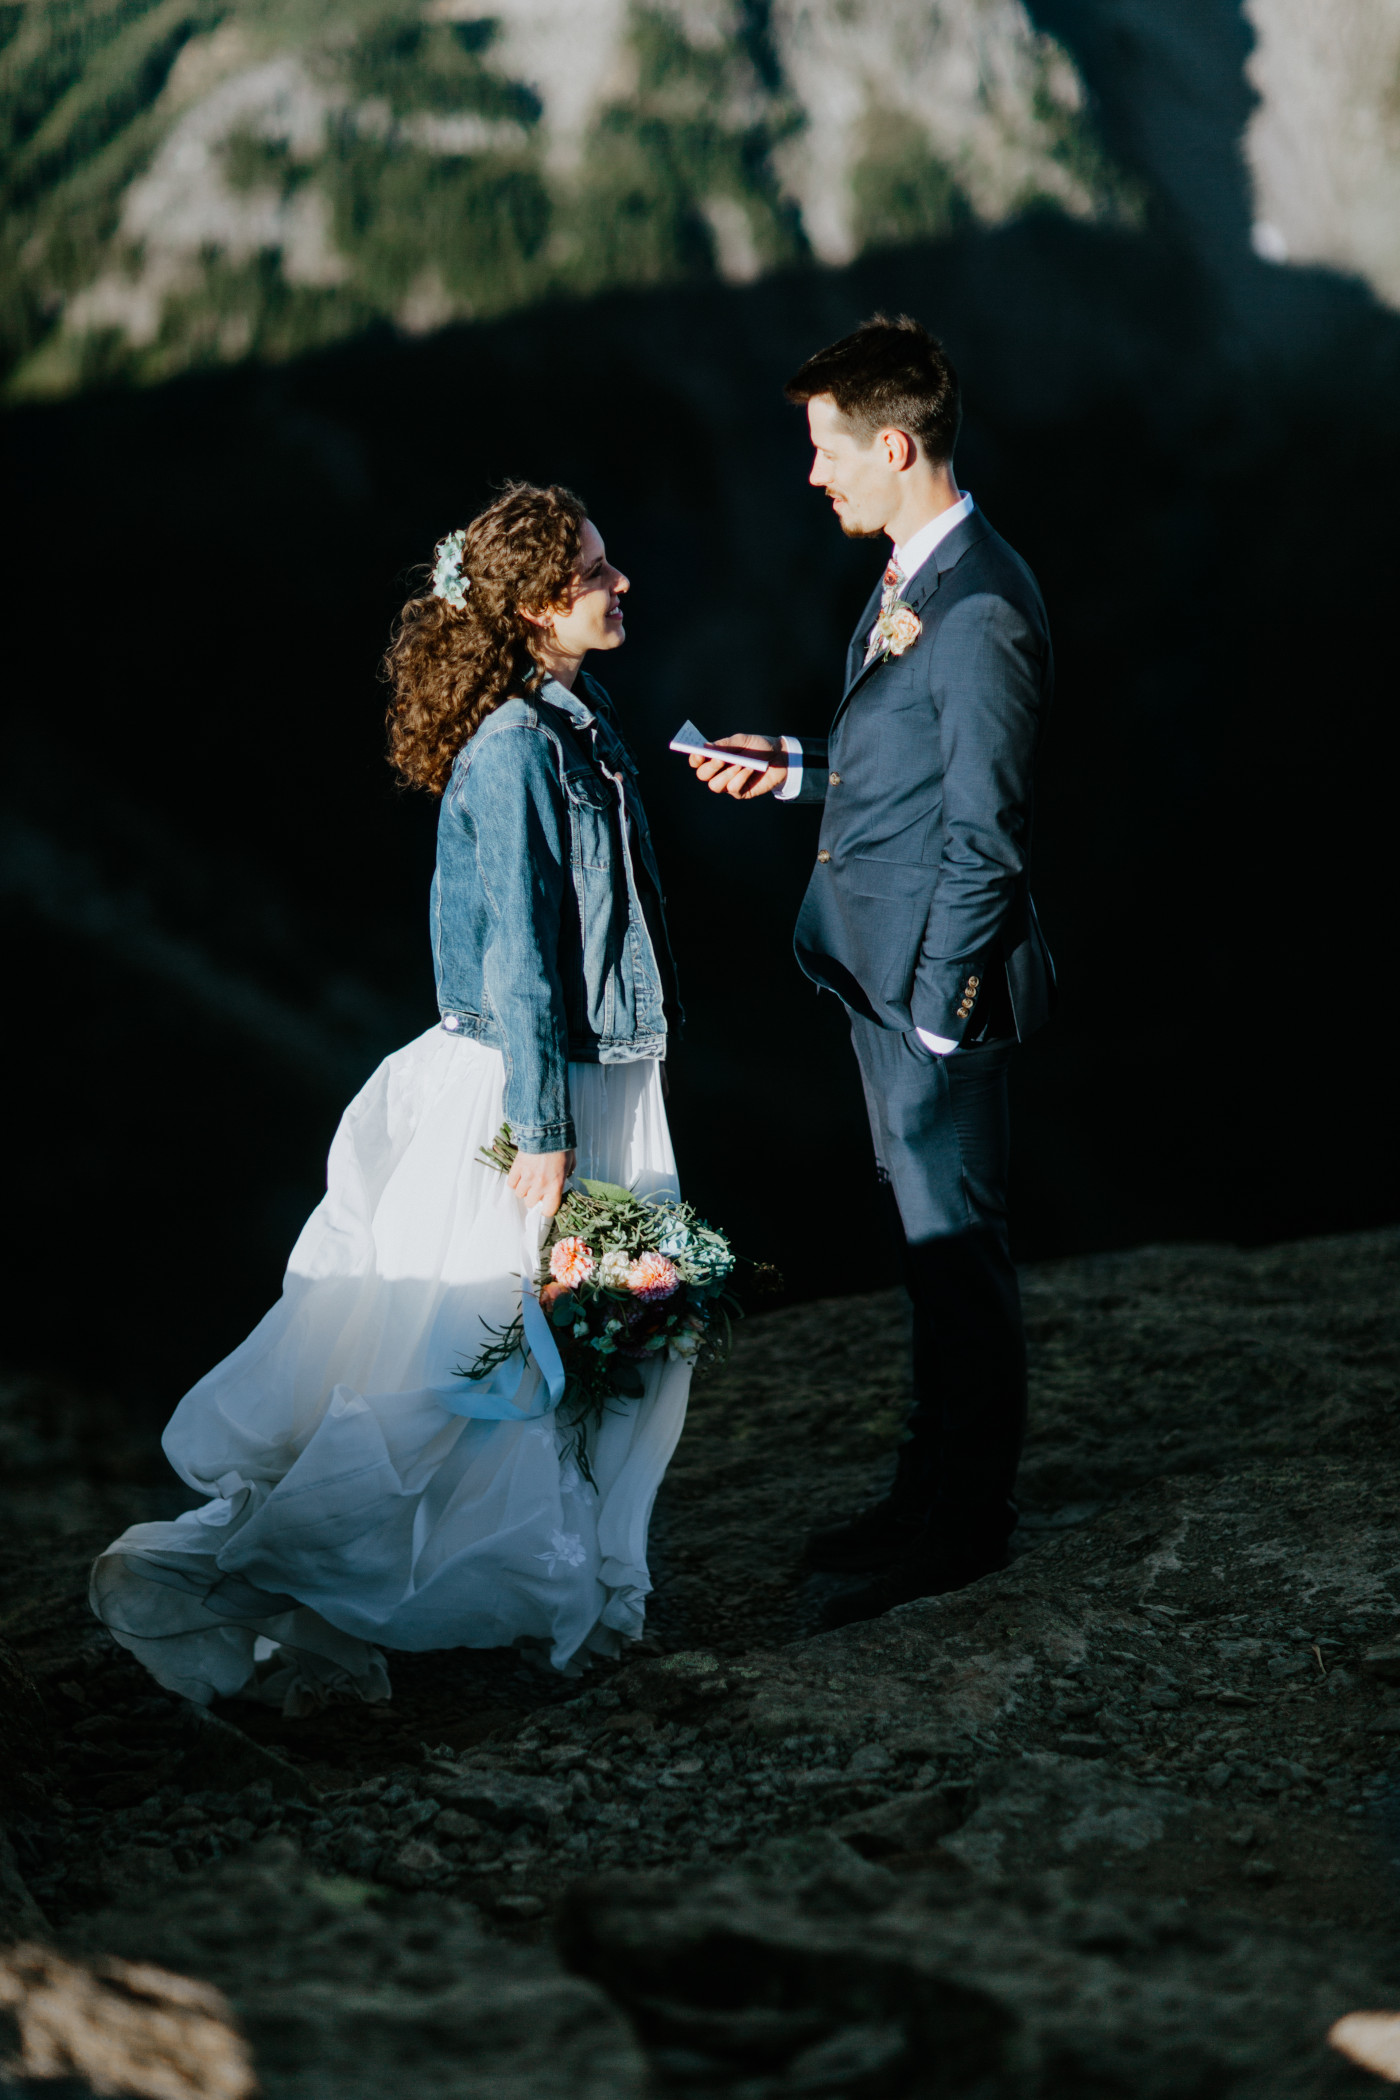 Tasha and Chad standing during their elopement ceremony. Elopement photography at Mount Rainier by Sienna Plus Josh.